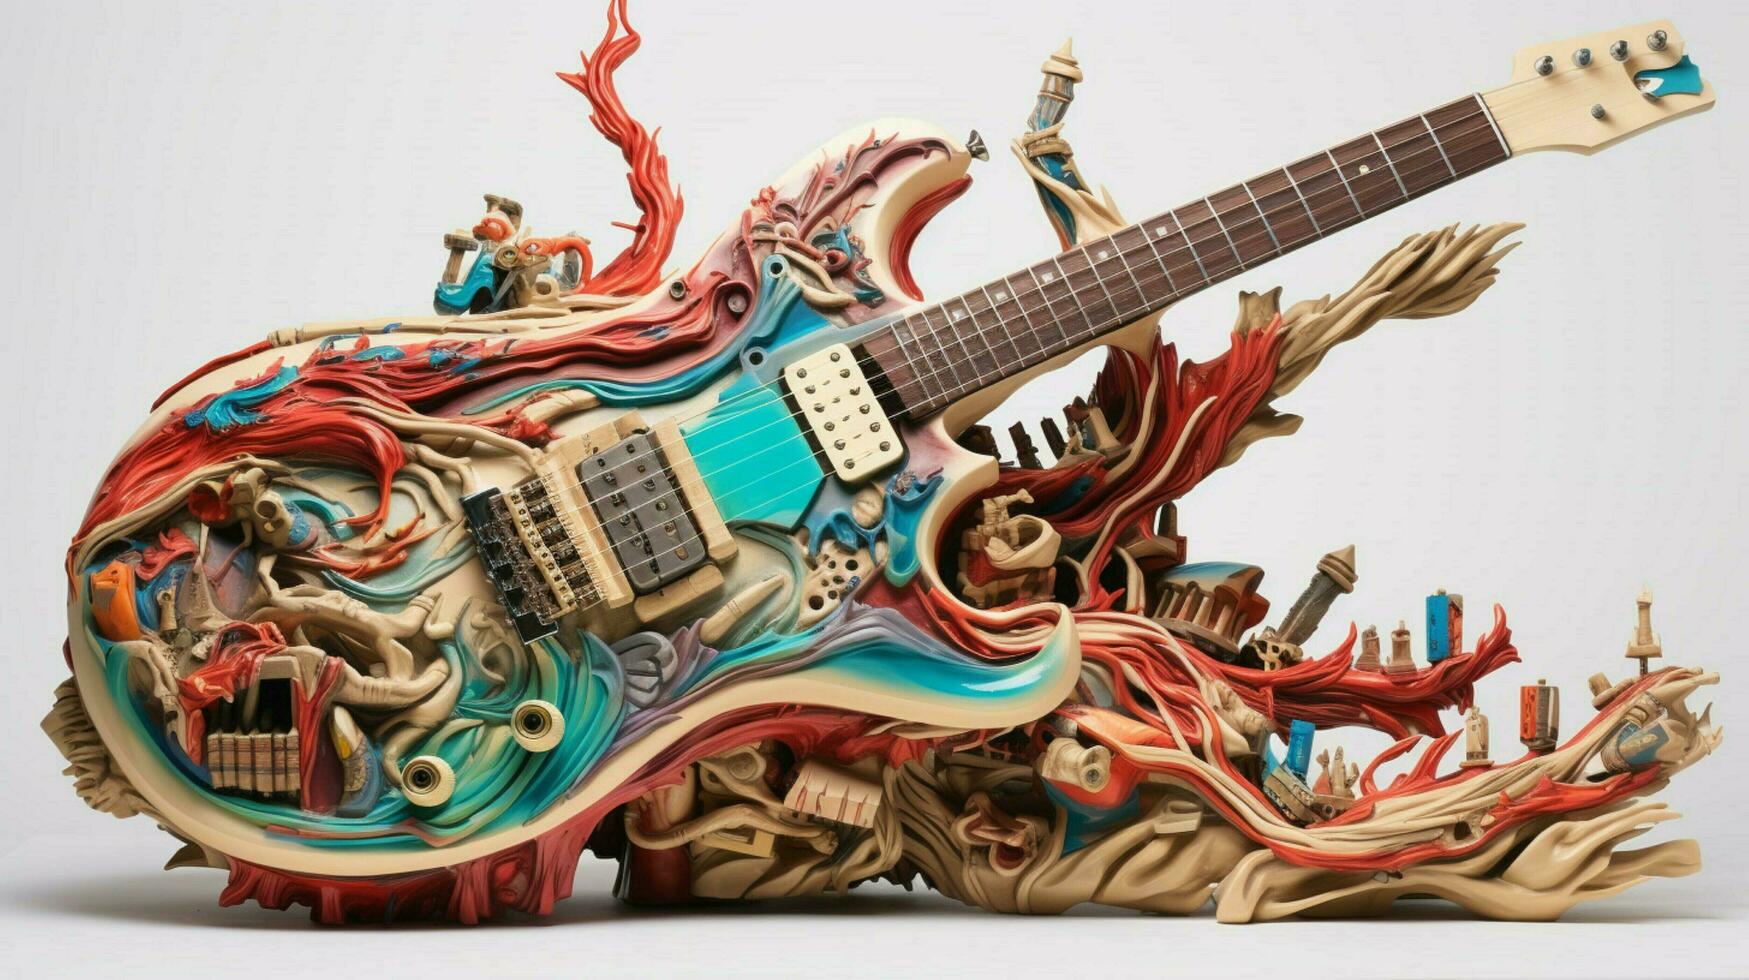 Exploded guitar by Nychos high quality photo